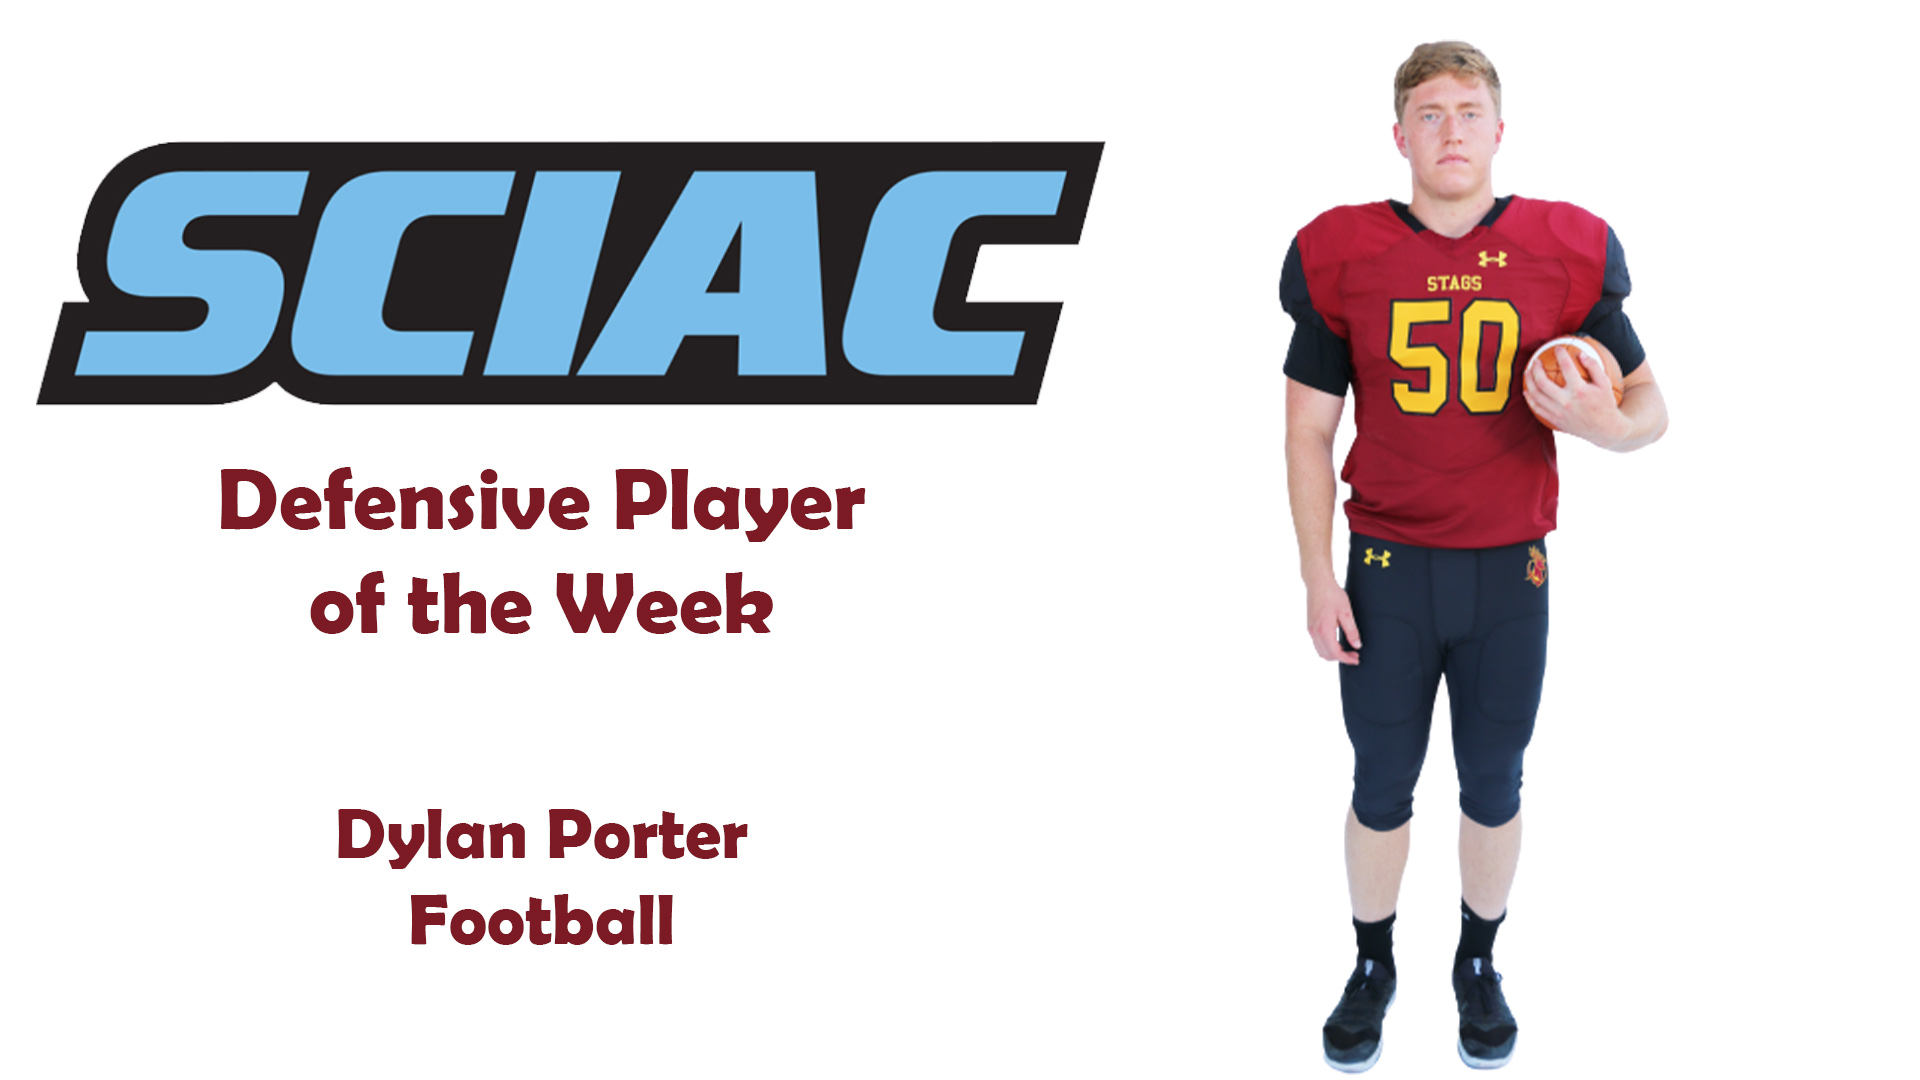 Posed shot of Dylan Porter and the SCIAC logo